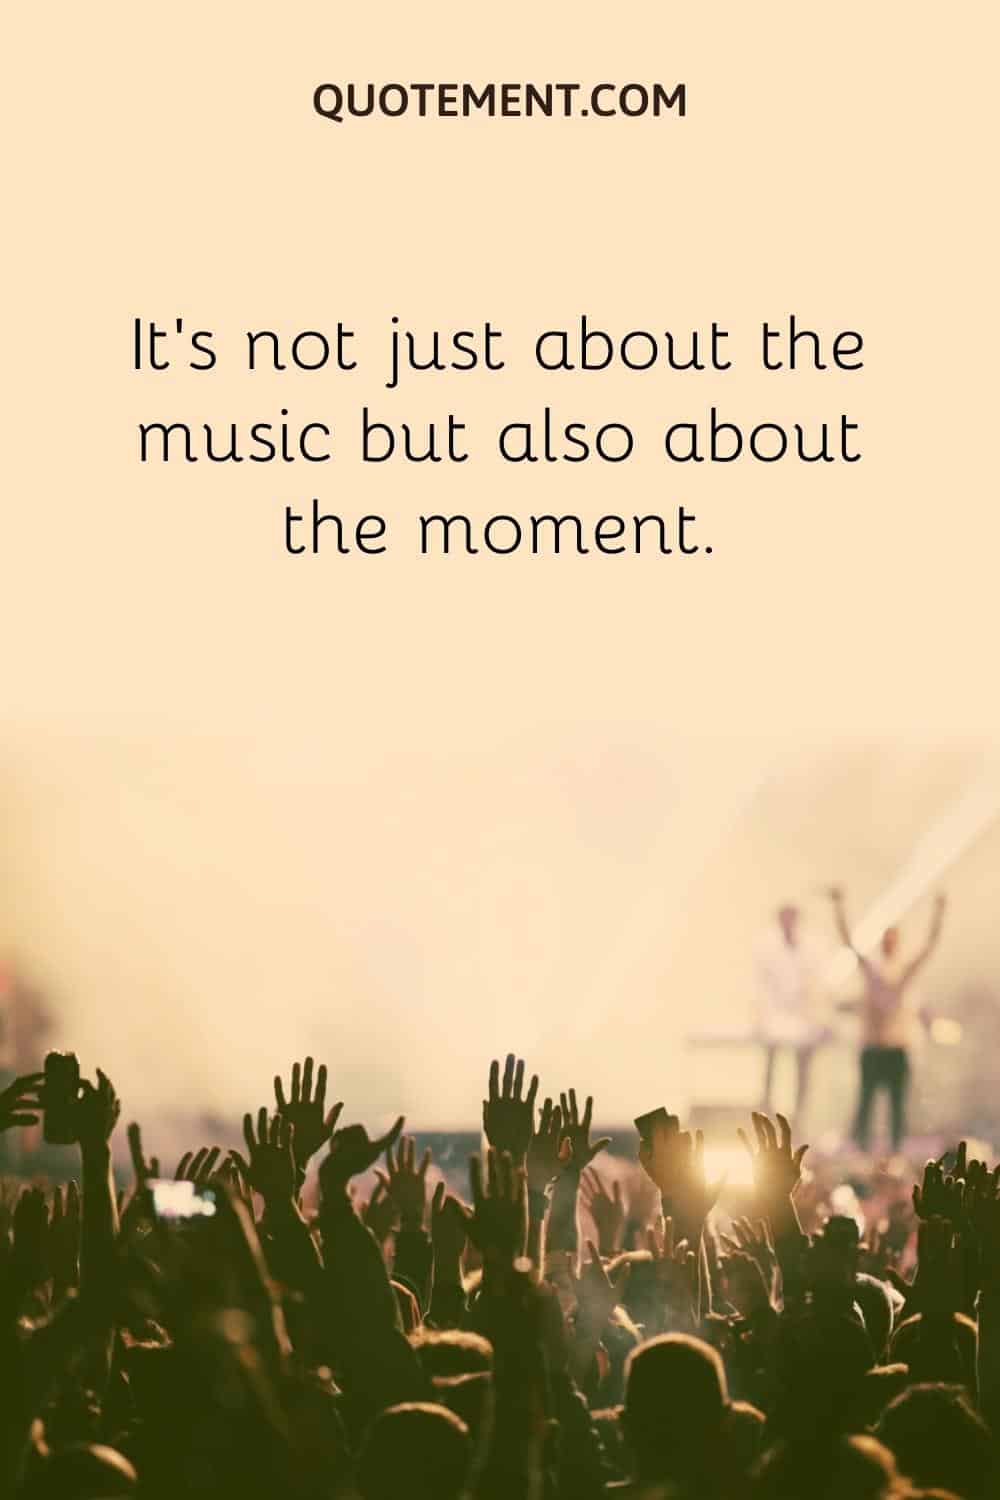 It's not just about the music but also about the moment